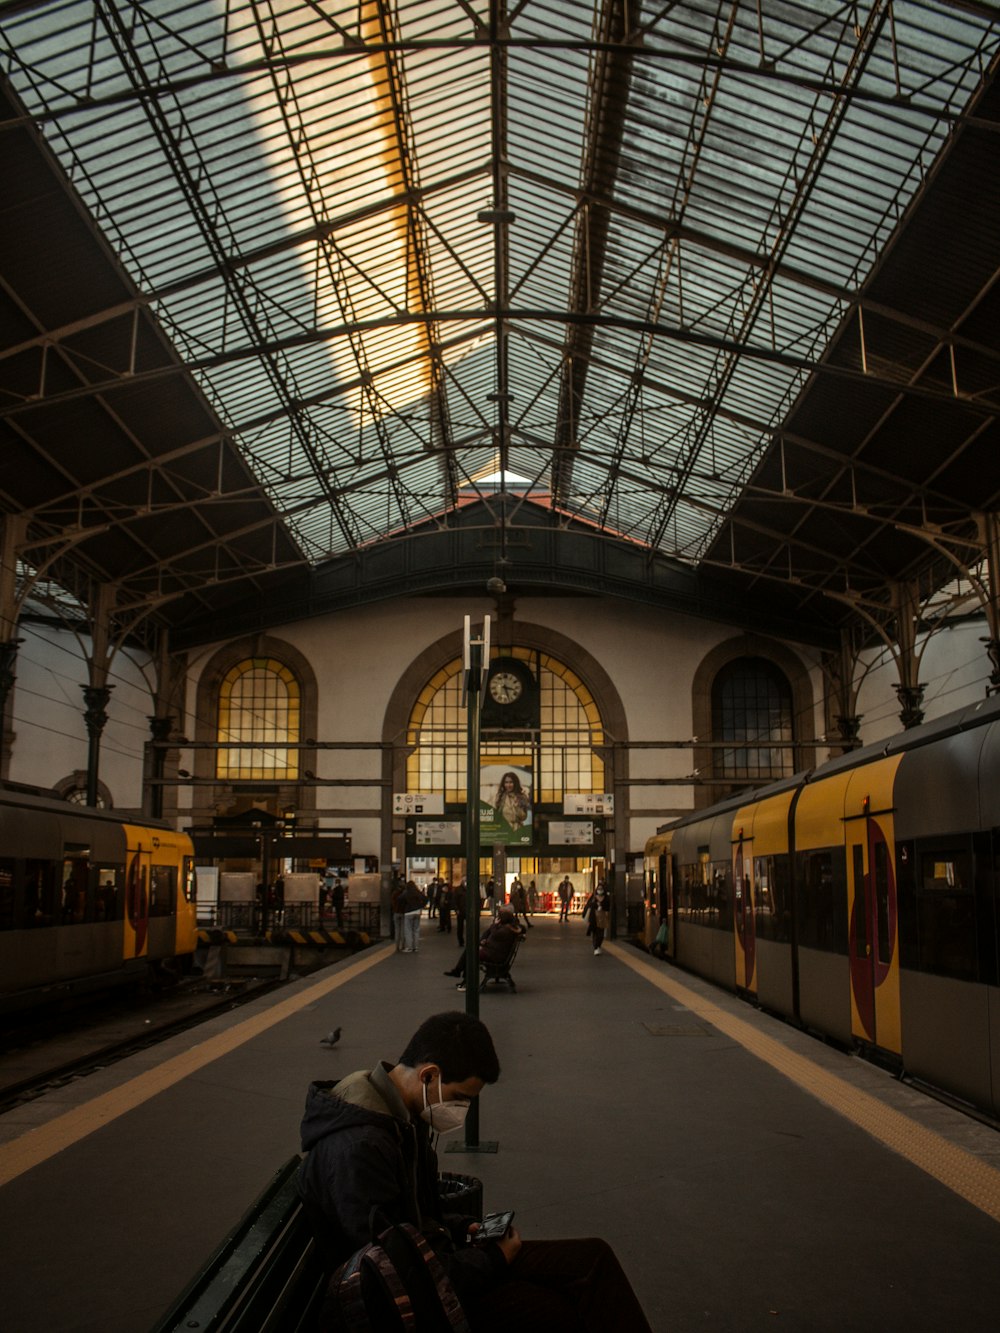 a man sitting on a bench in a train station